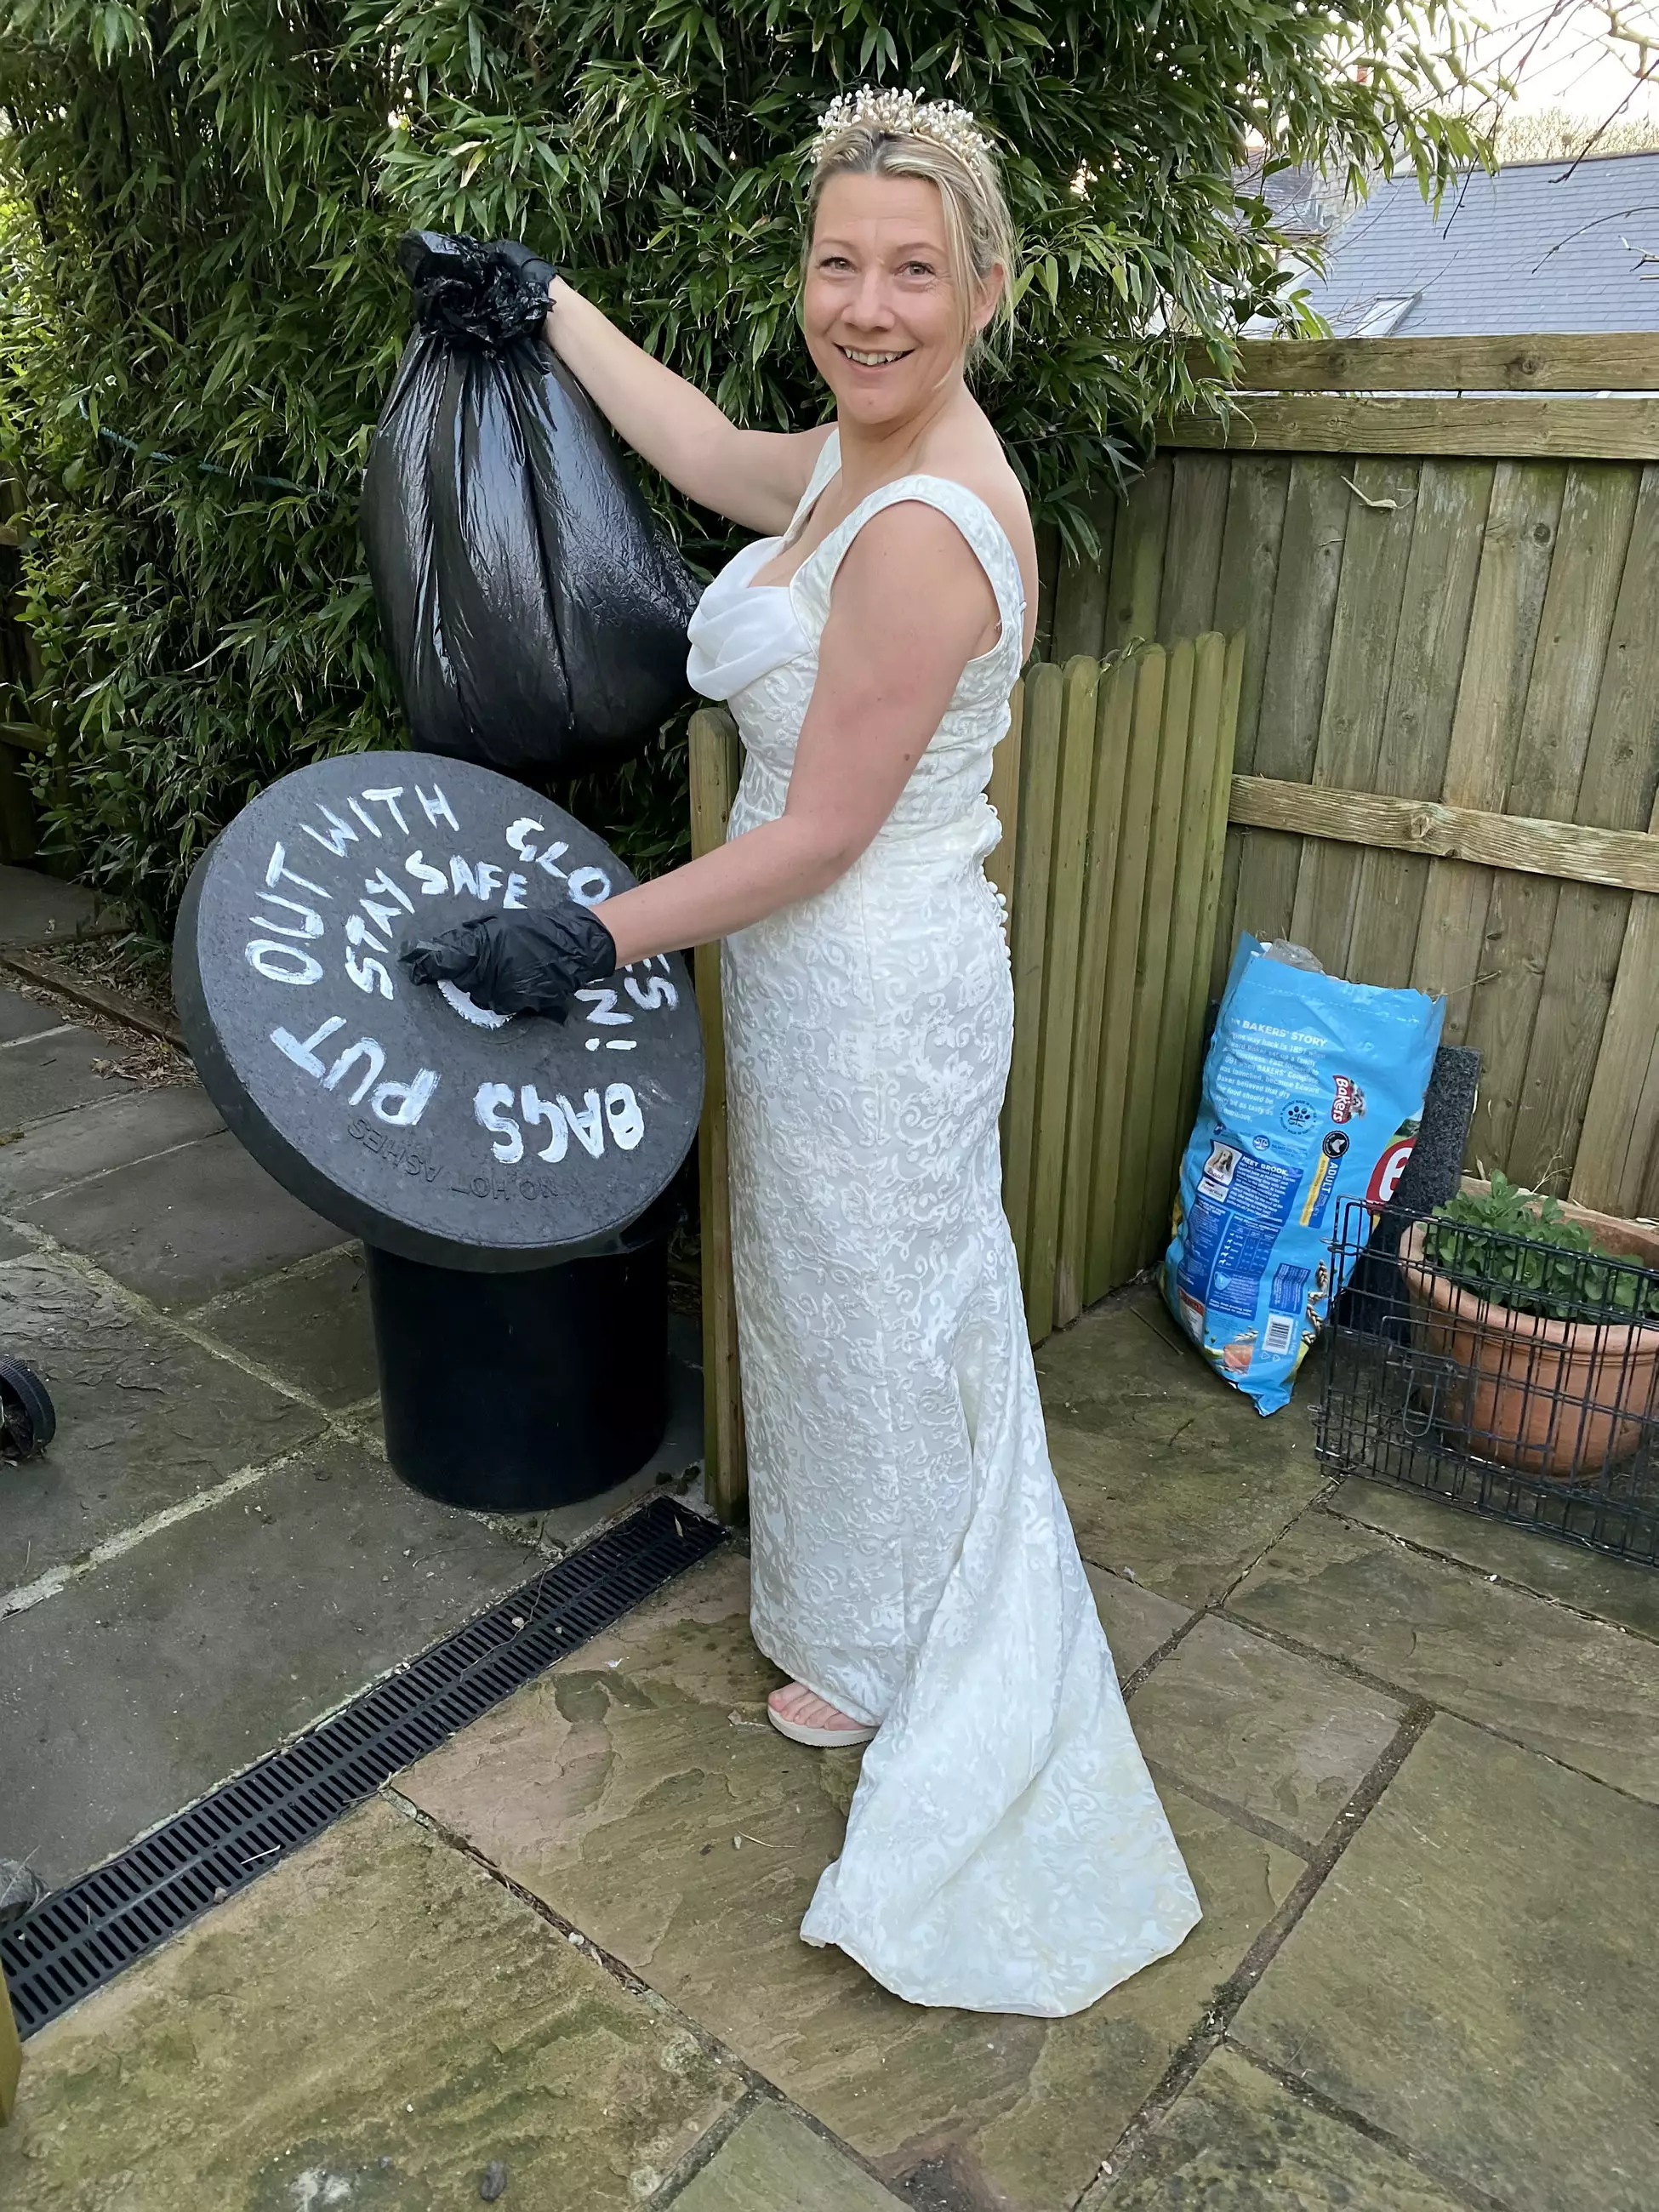 Binderella: another entrant donned her wedding dress to do the bins (